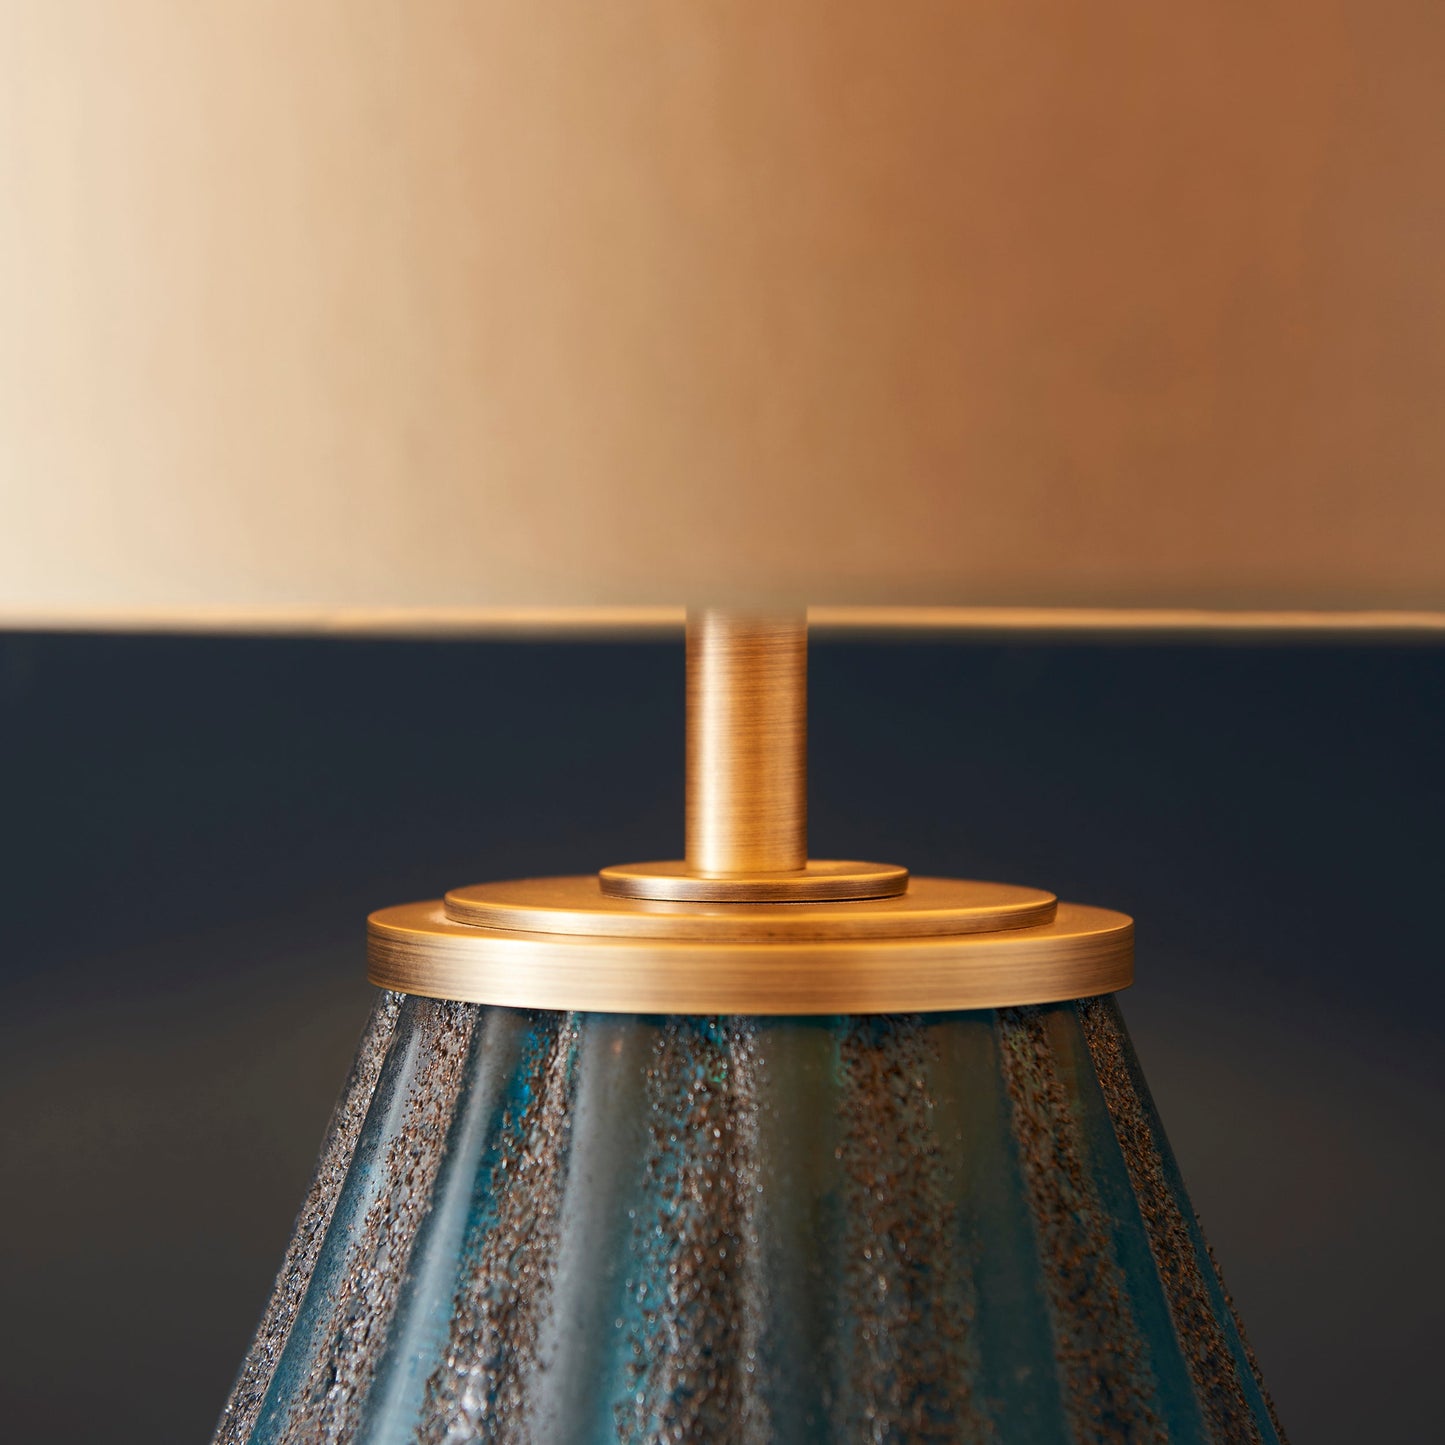 Turquoise Fluted & Textured Blown Glass Table Lamp - ID 11642